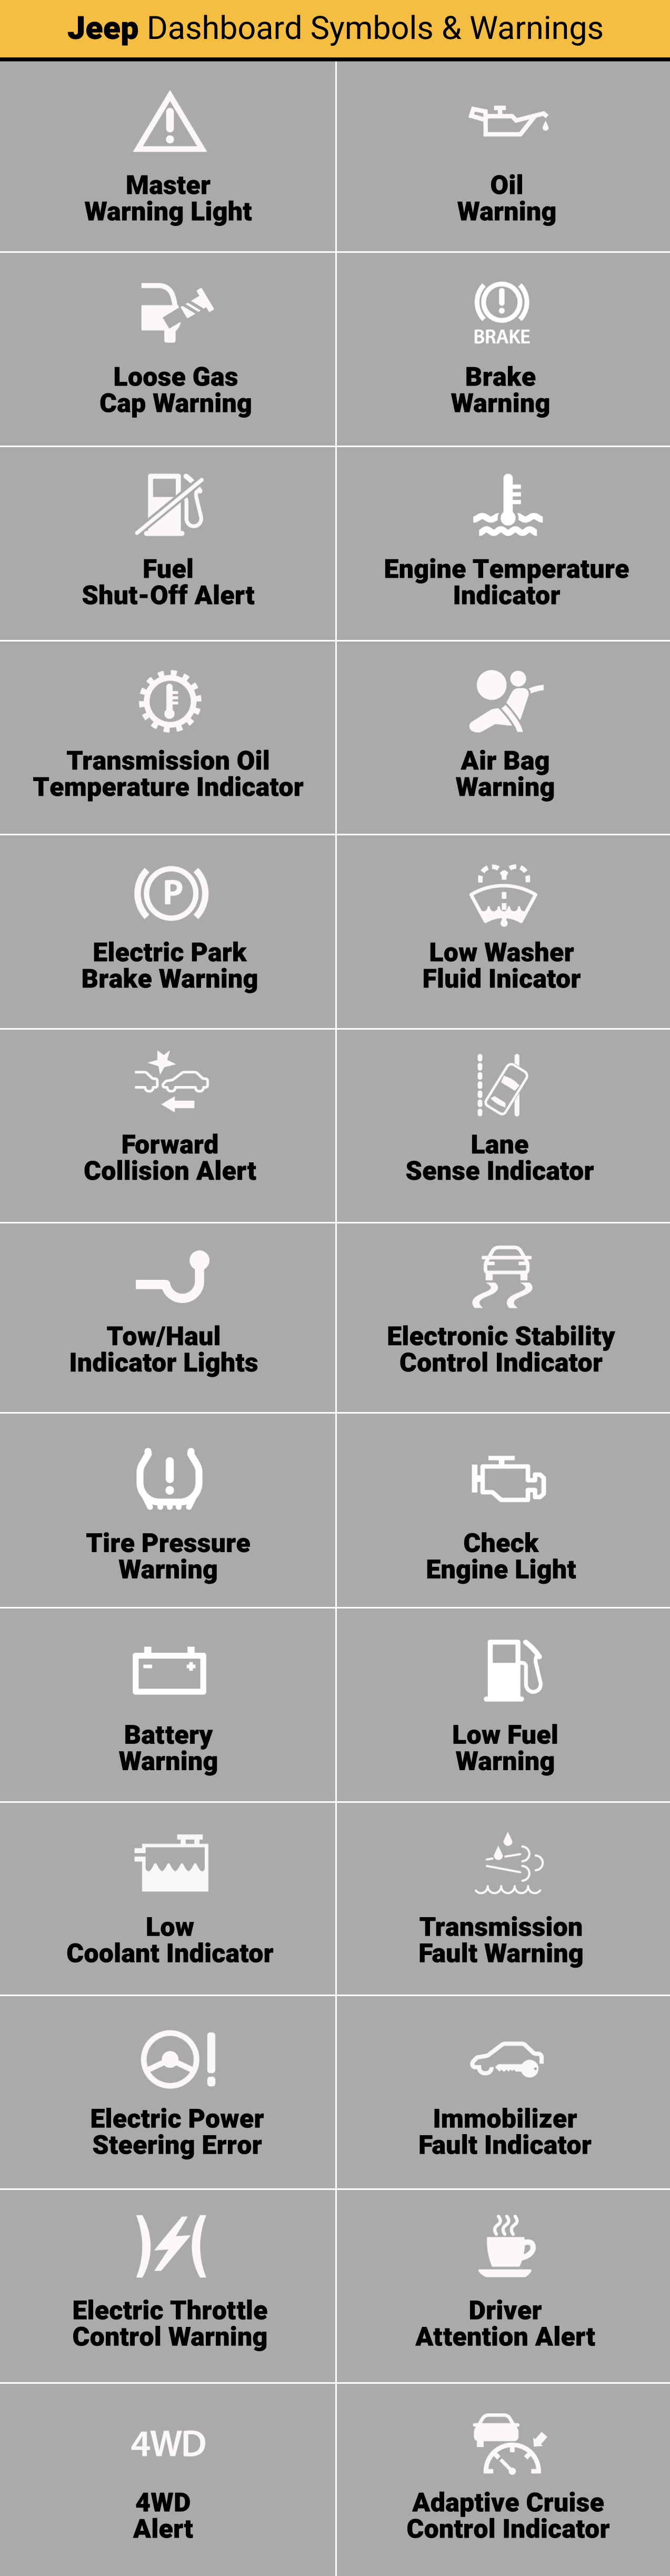 How Do You Know If Your Jeep Transmission is Going Out  : Warning Signs to Watch For